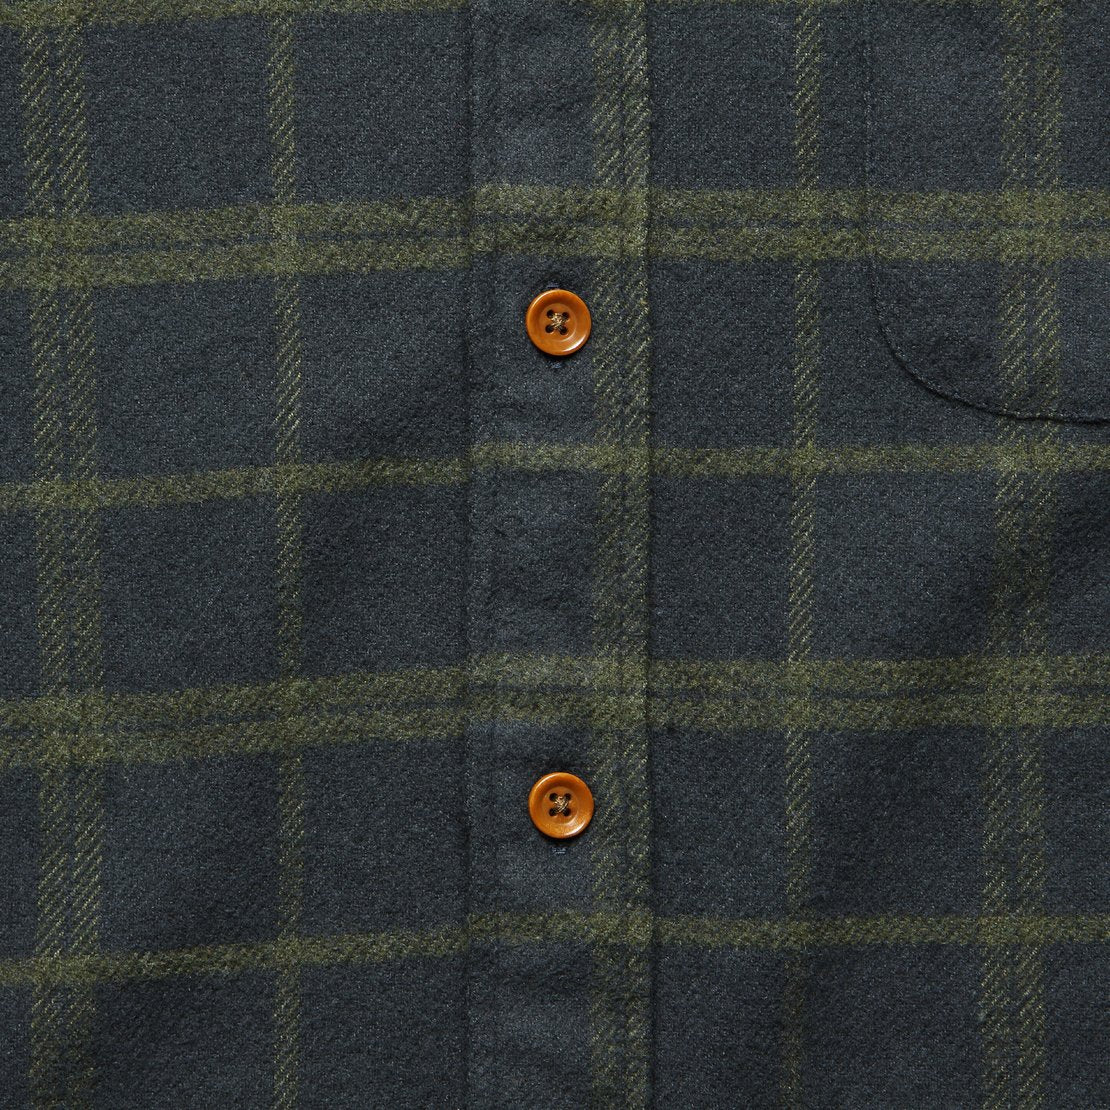 Seaview Shirt - Charcoal Olive Windowpane - Faherty - STAG Provisions - Tops - L/S Woven - Plaid